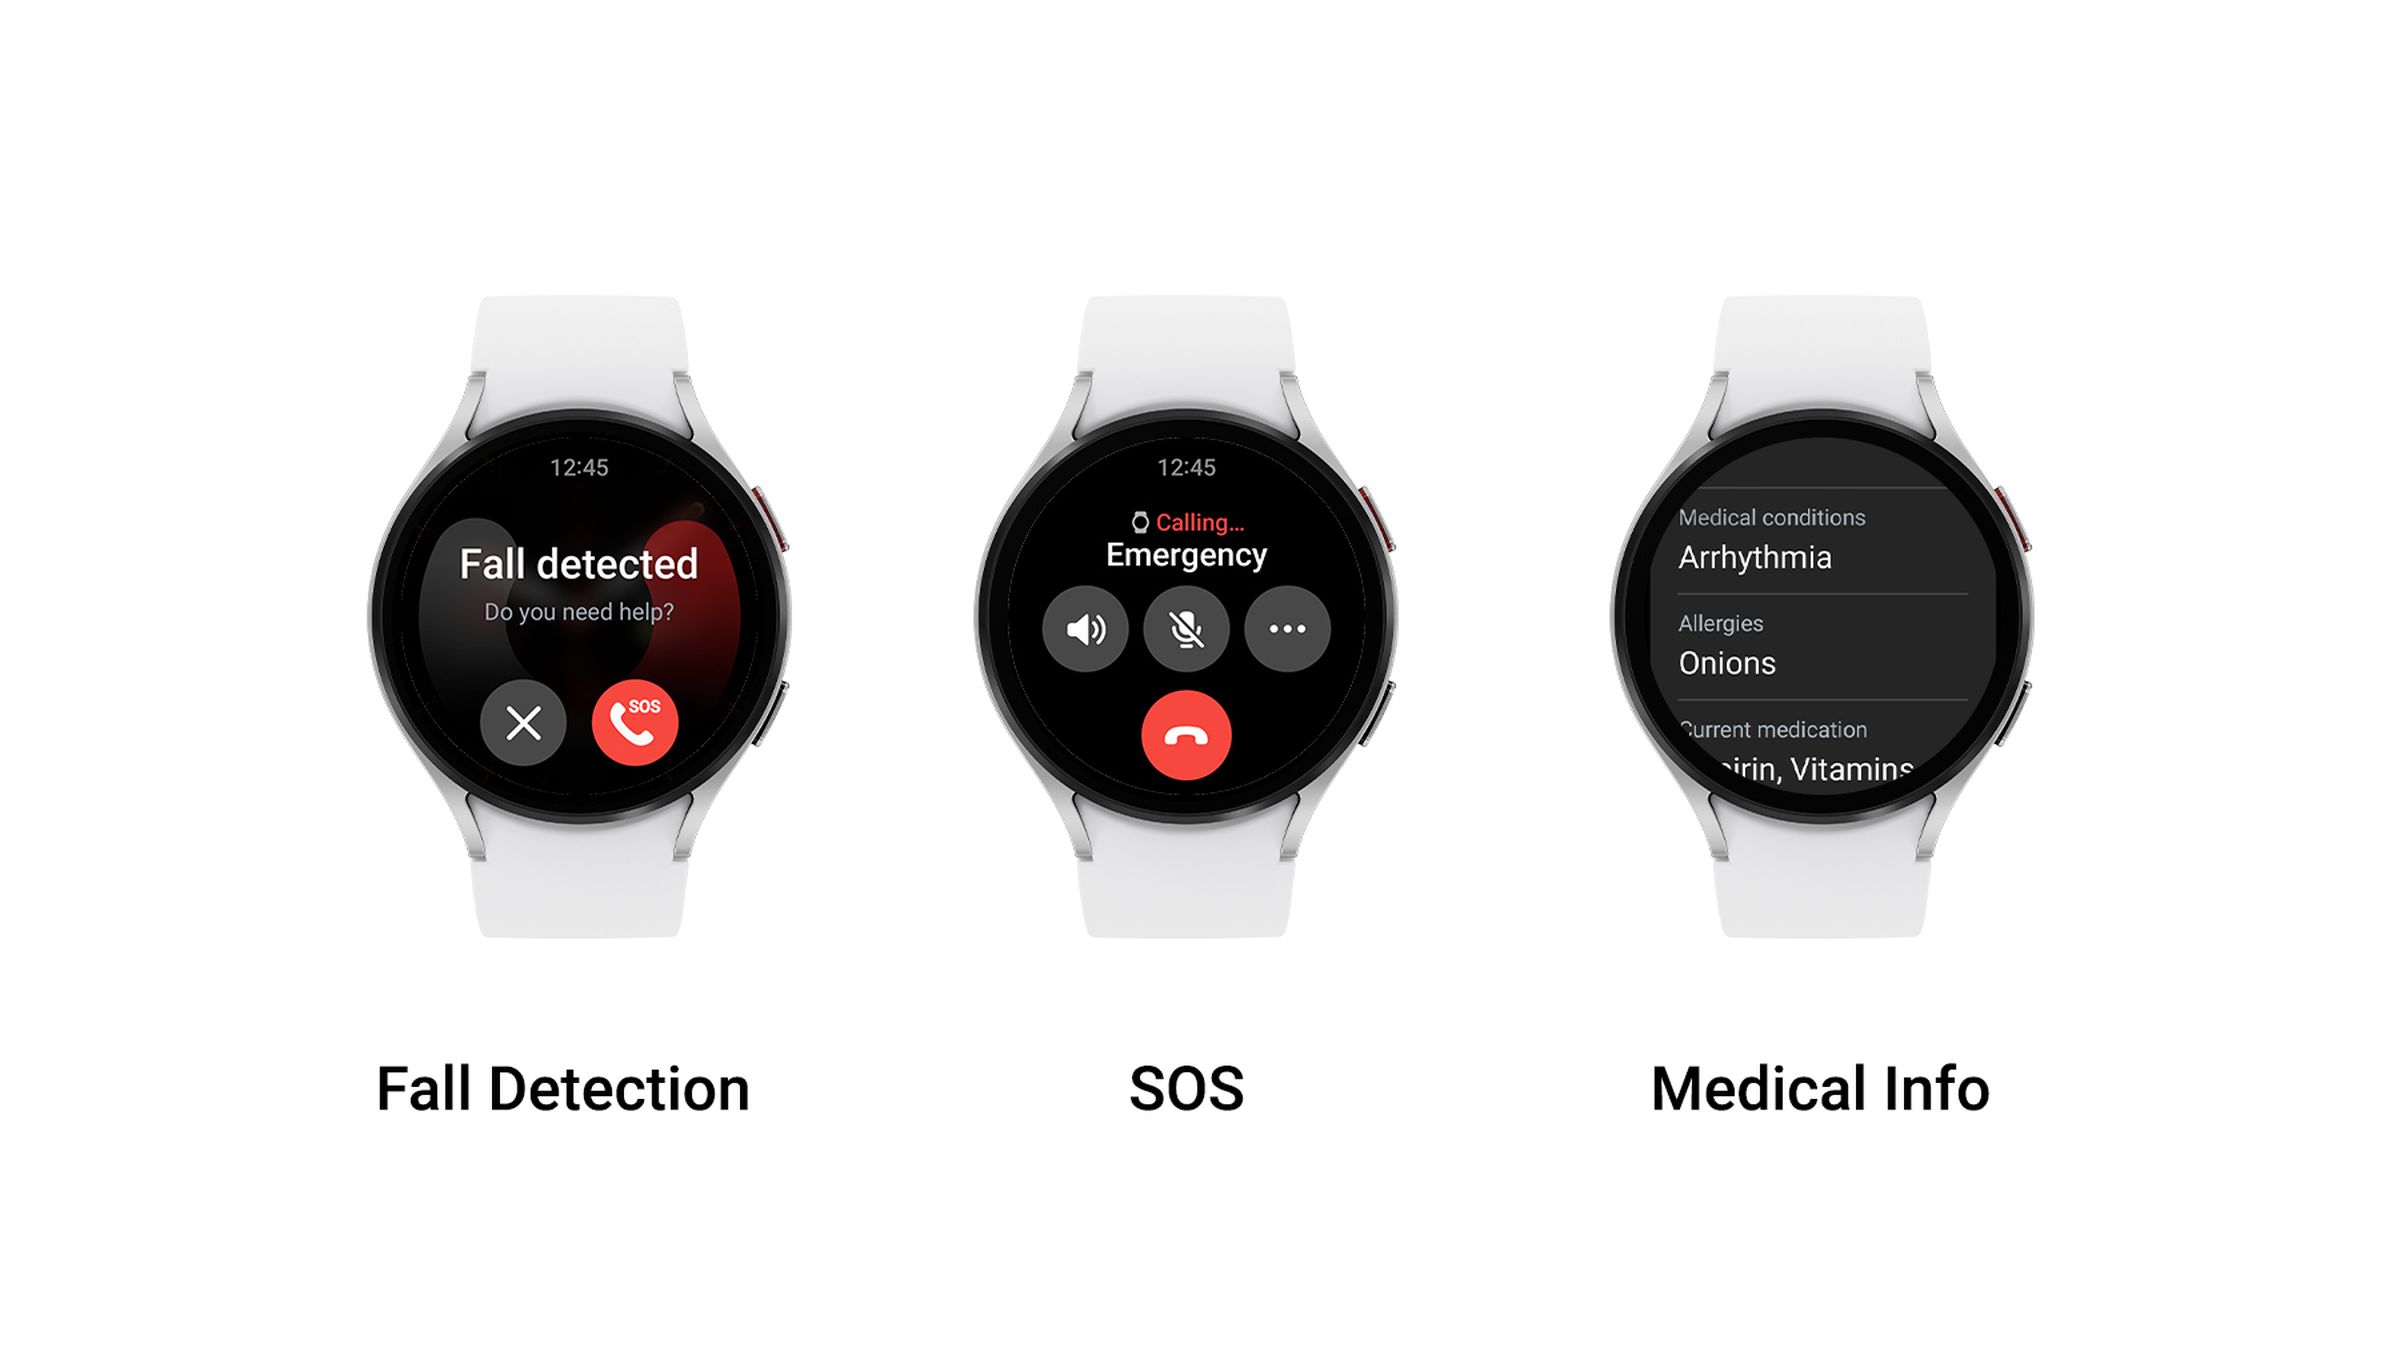 Renders of Samsung’s emergency SOS features on a Samsung Galaxy Watch